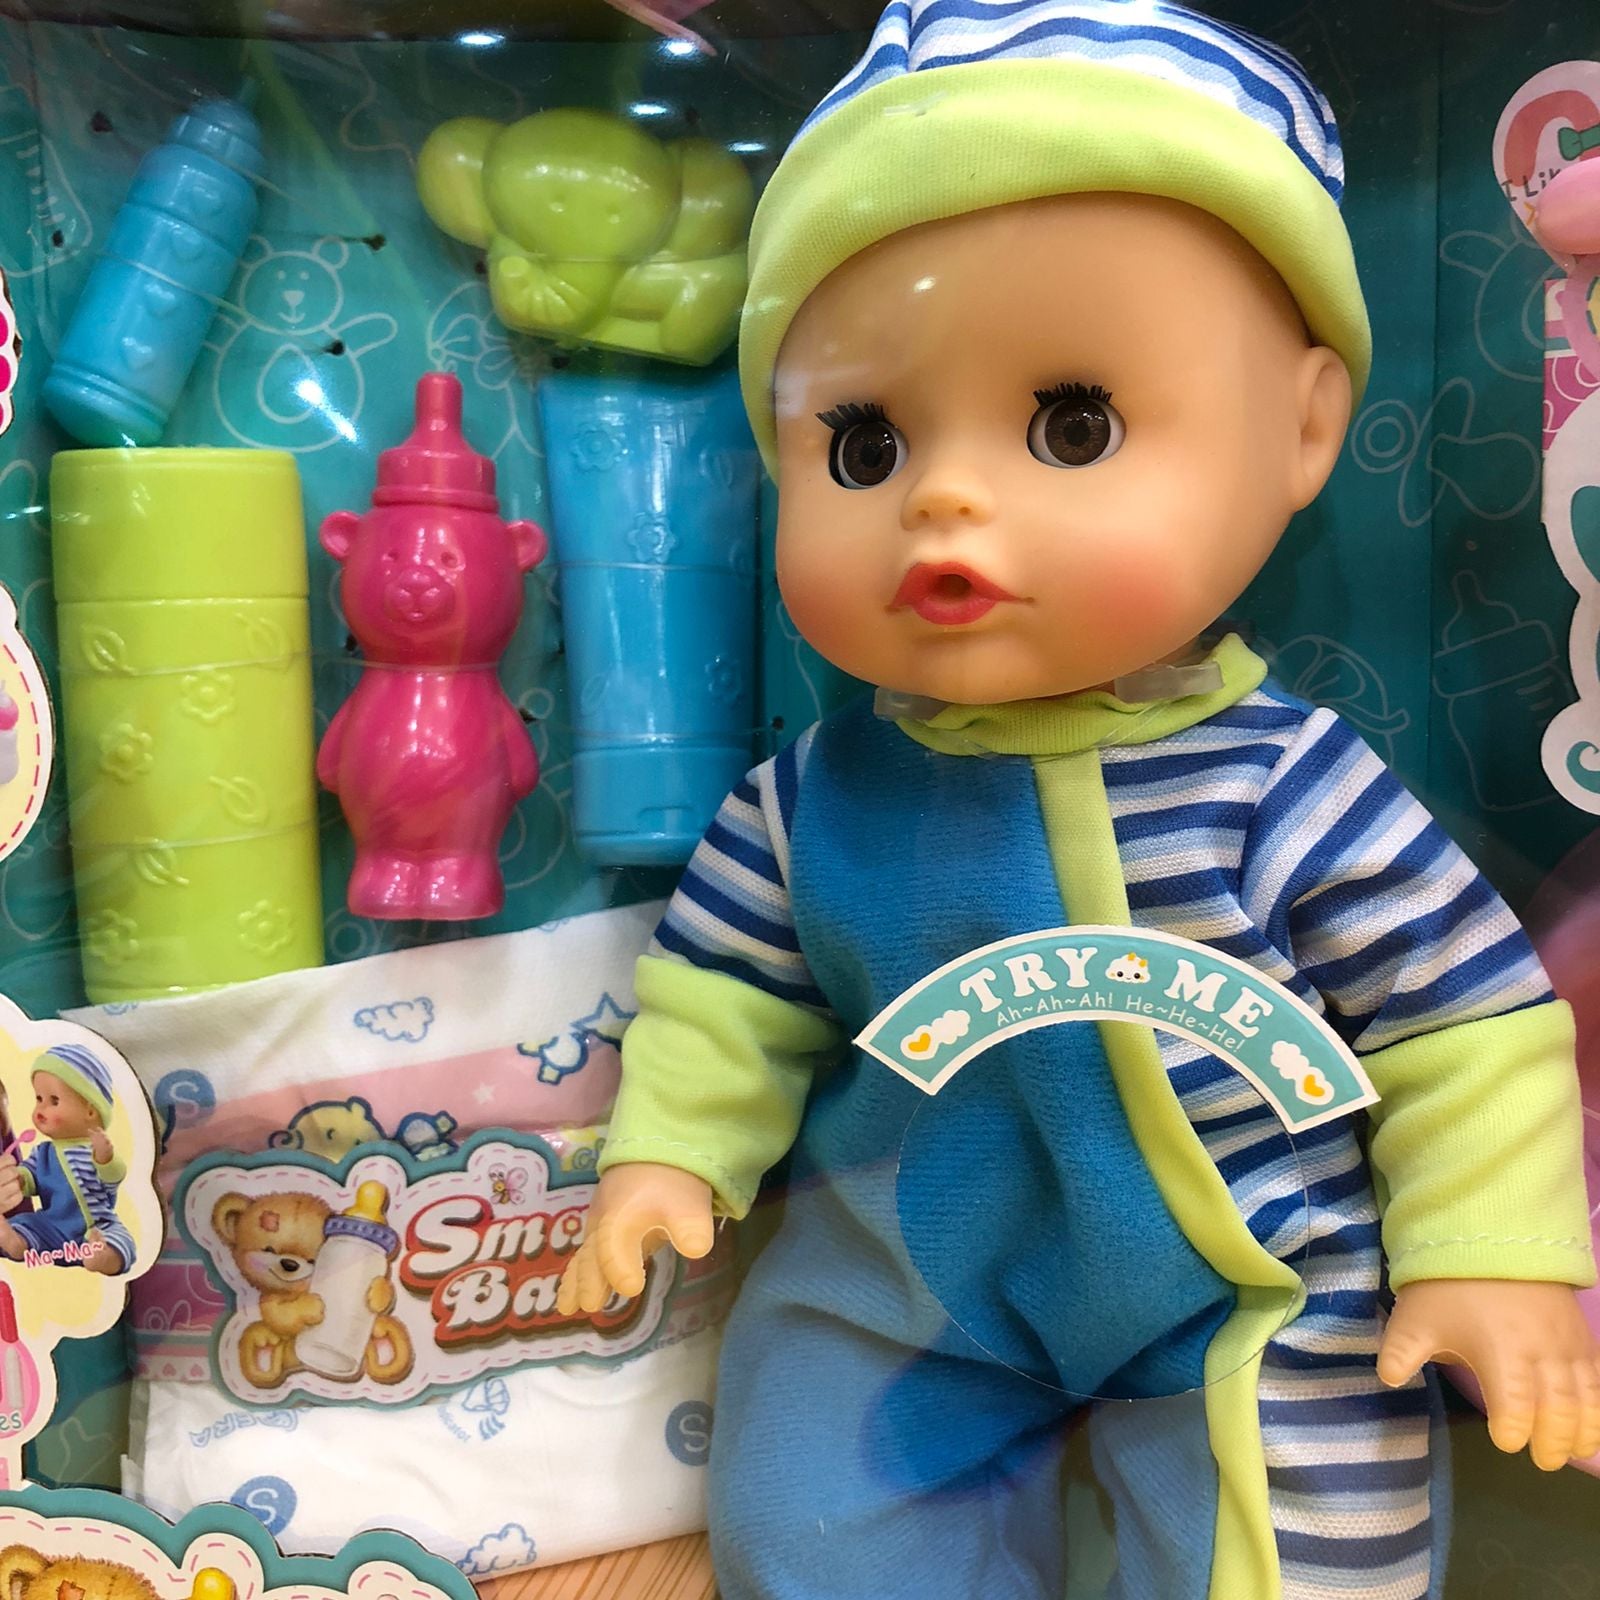 Smart baby Doll